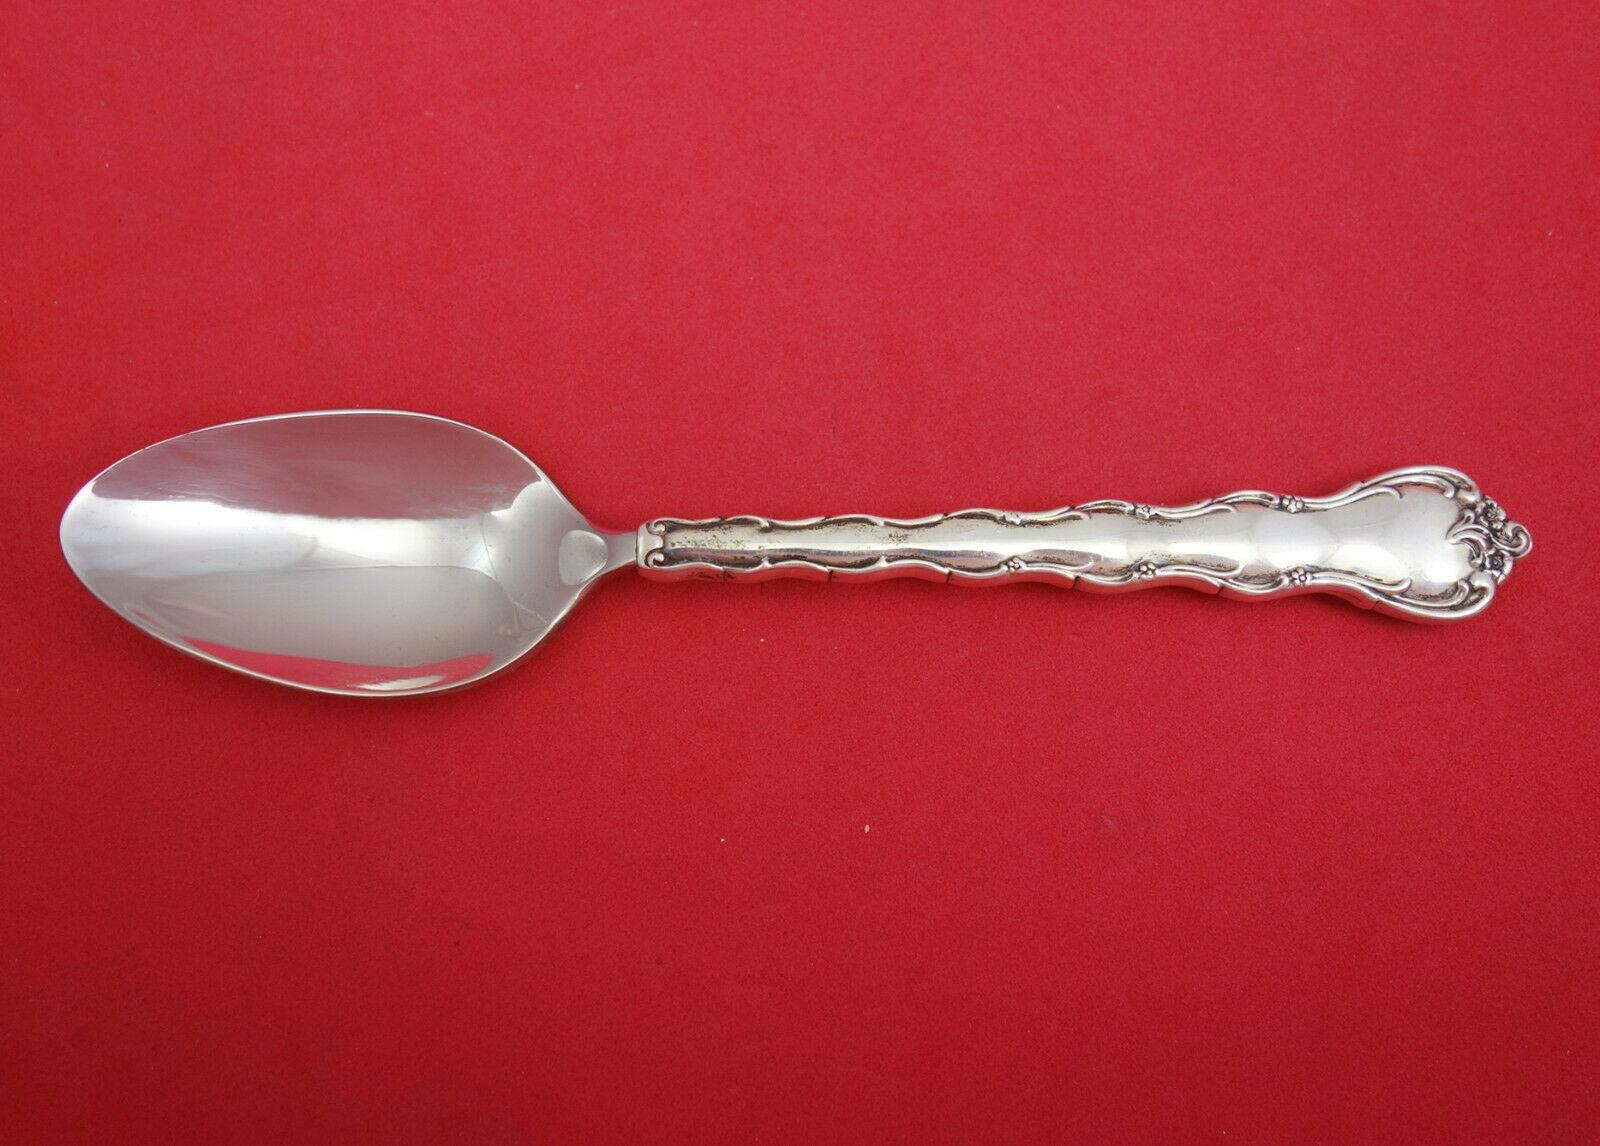 BIRKS CHANTILLY STERLING SILVER CITRUS SPOON VERY GOOD CONDITION S GW 